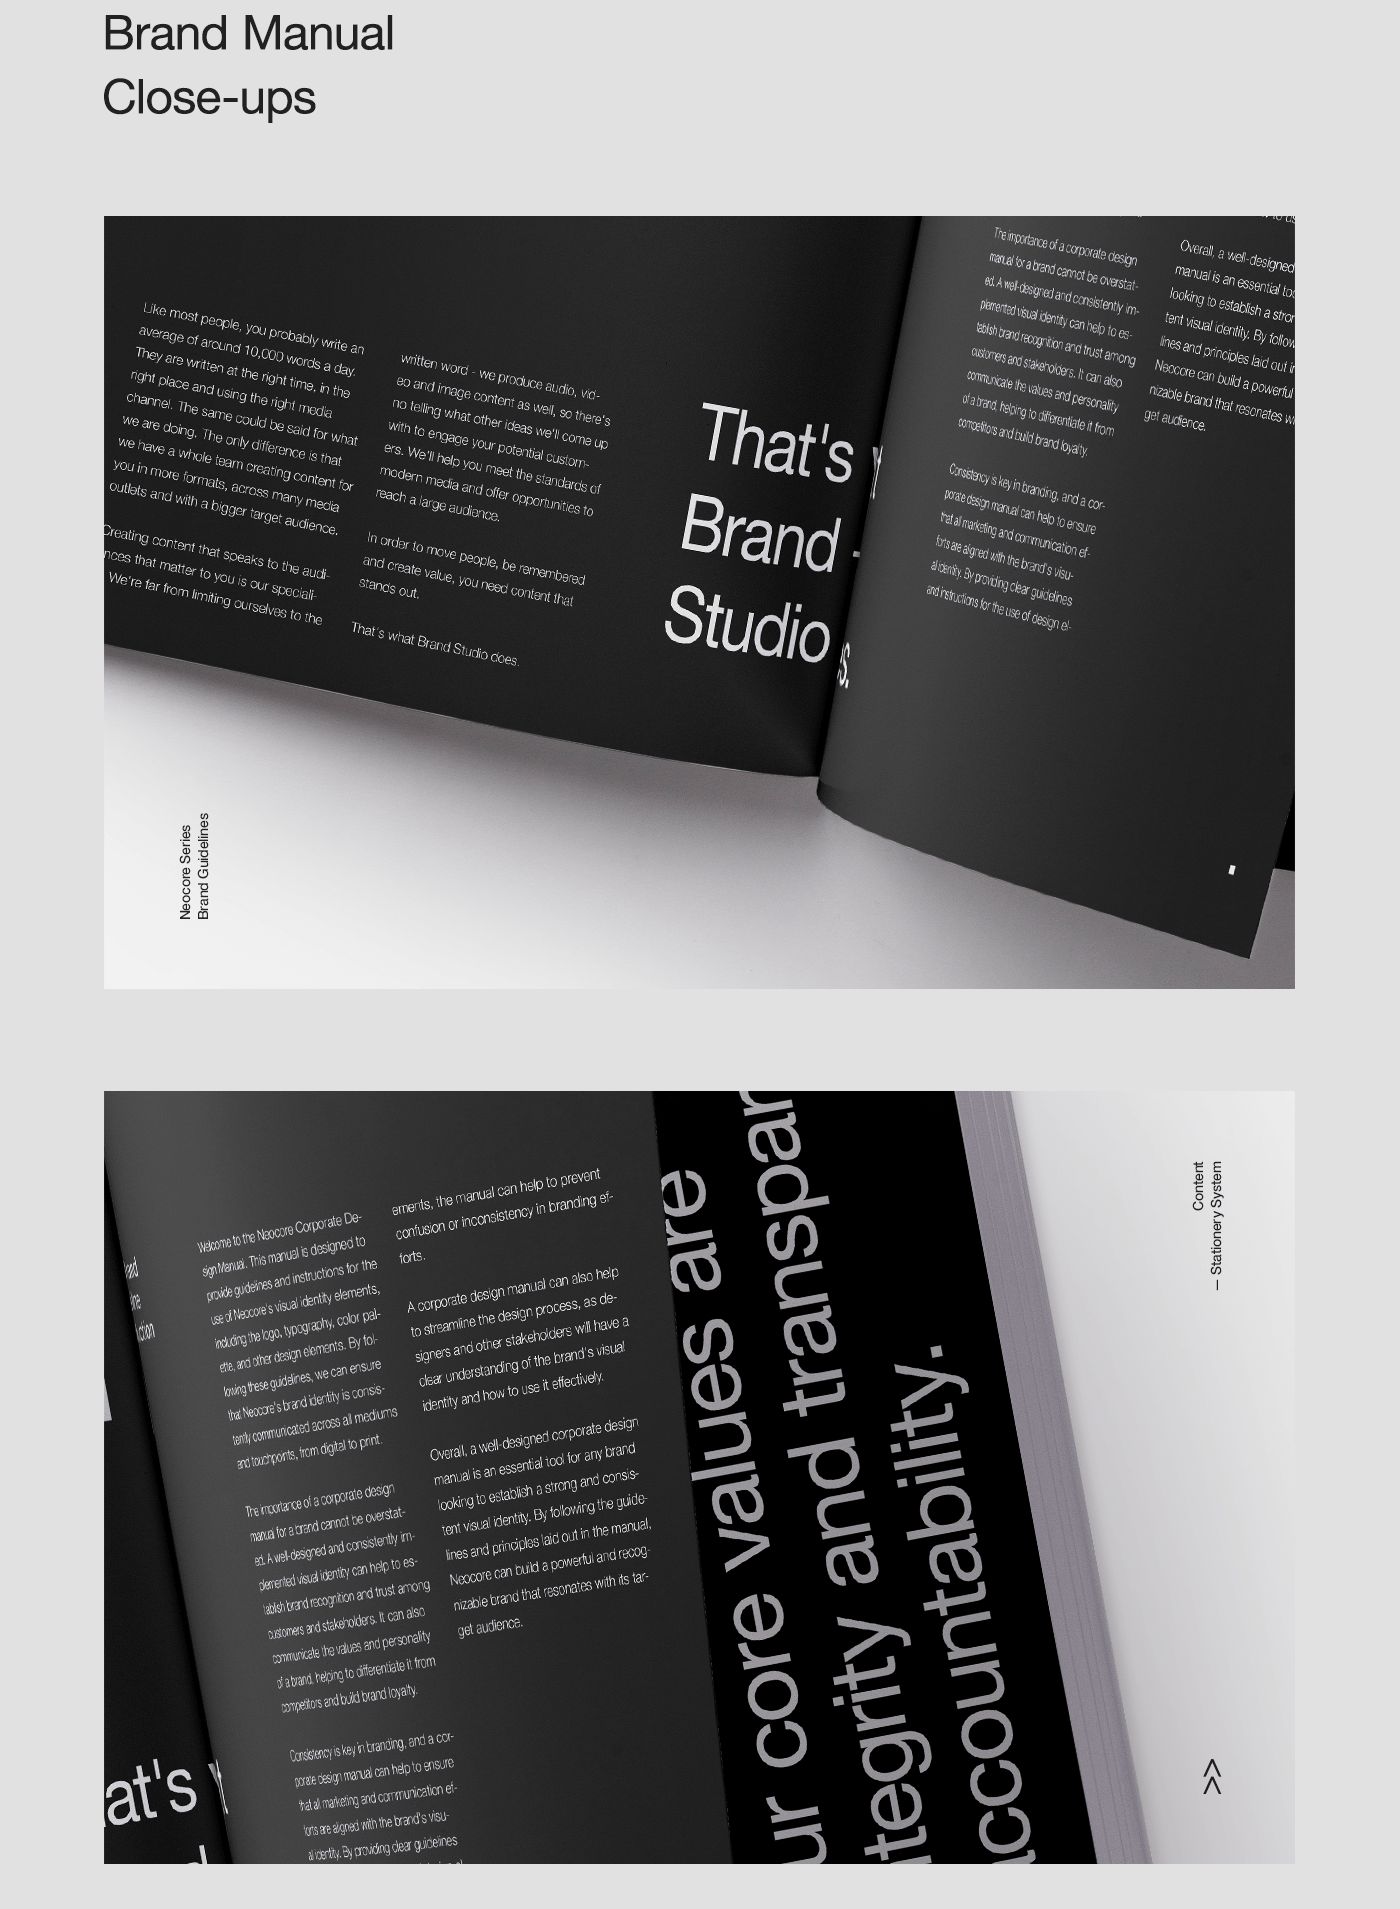 See some close ups and screenshots of the real text brand guideline brochure